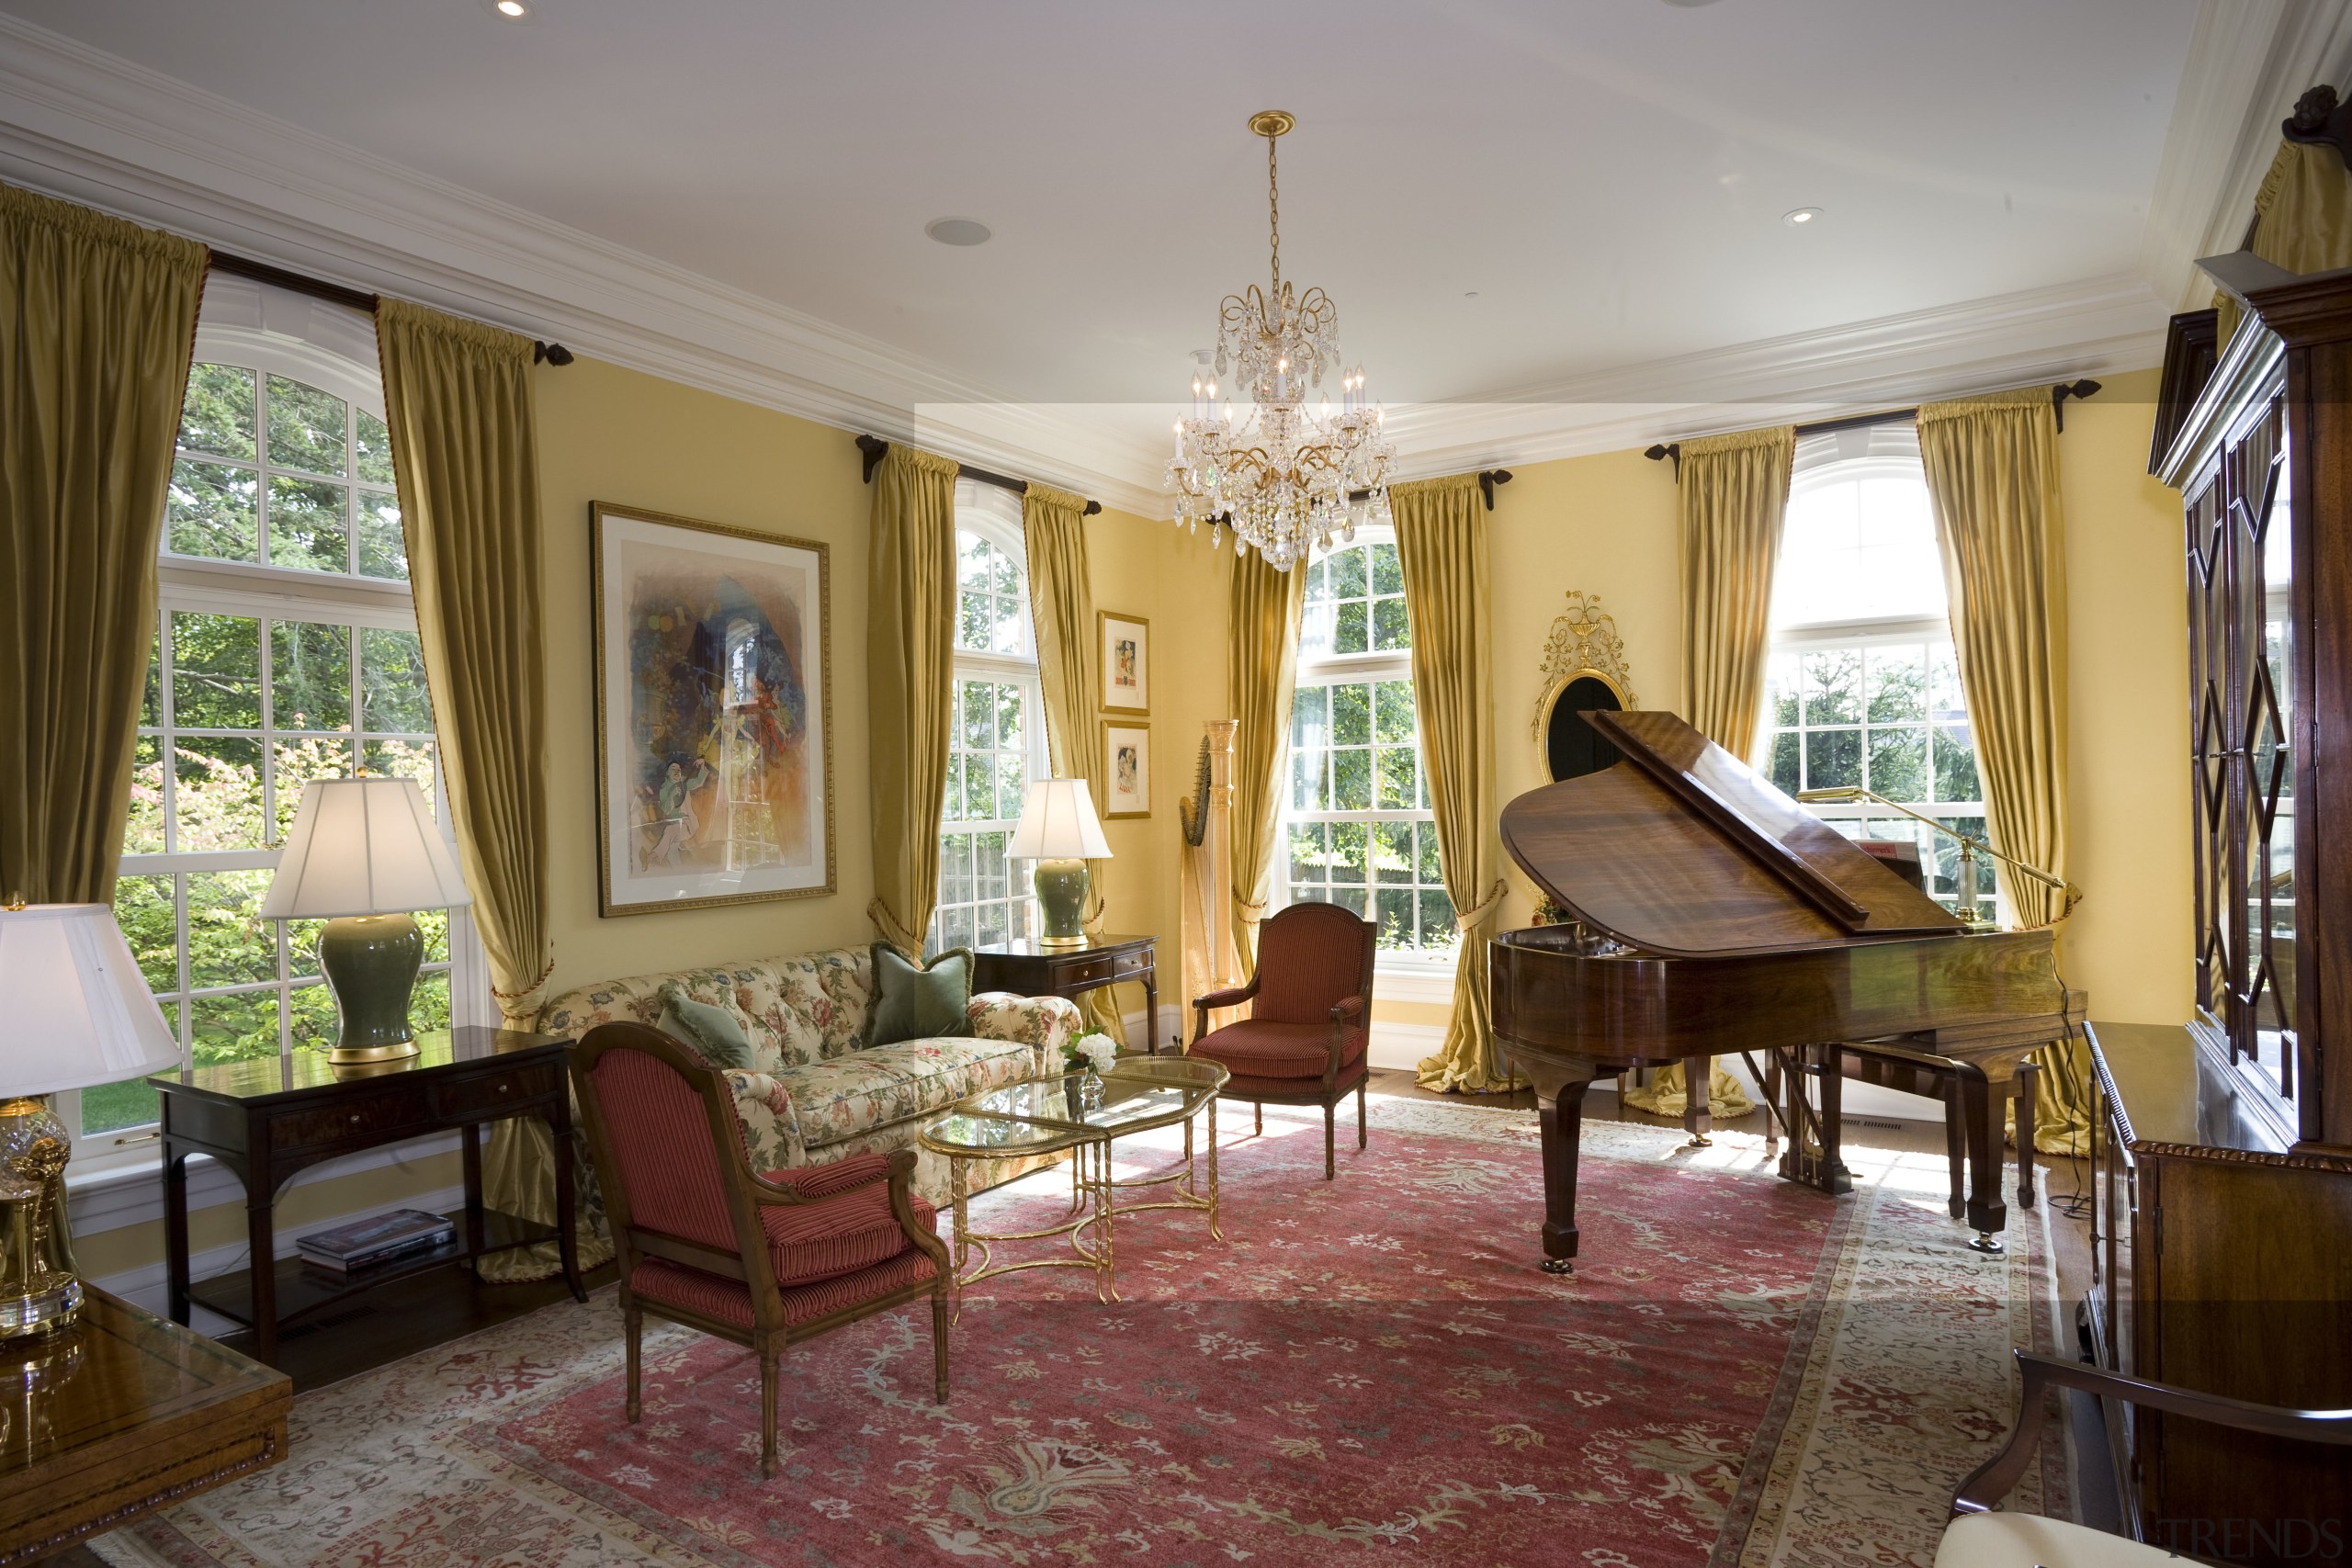 View of the music room with grand piano, ceiling, dining room, estate, home, house, interior design, living room, property, real estate, room, window, gray, brown